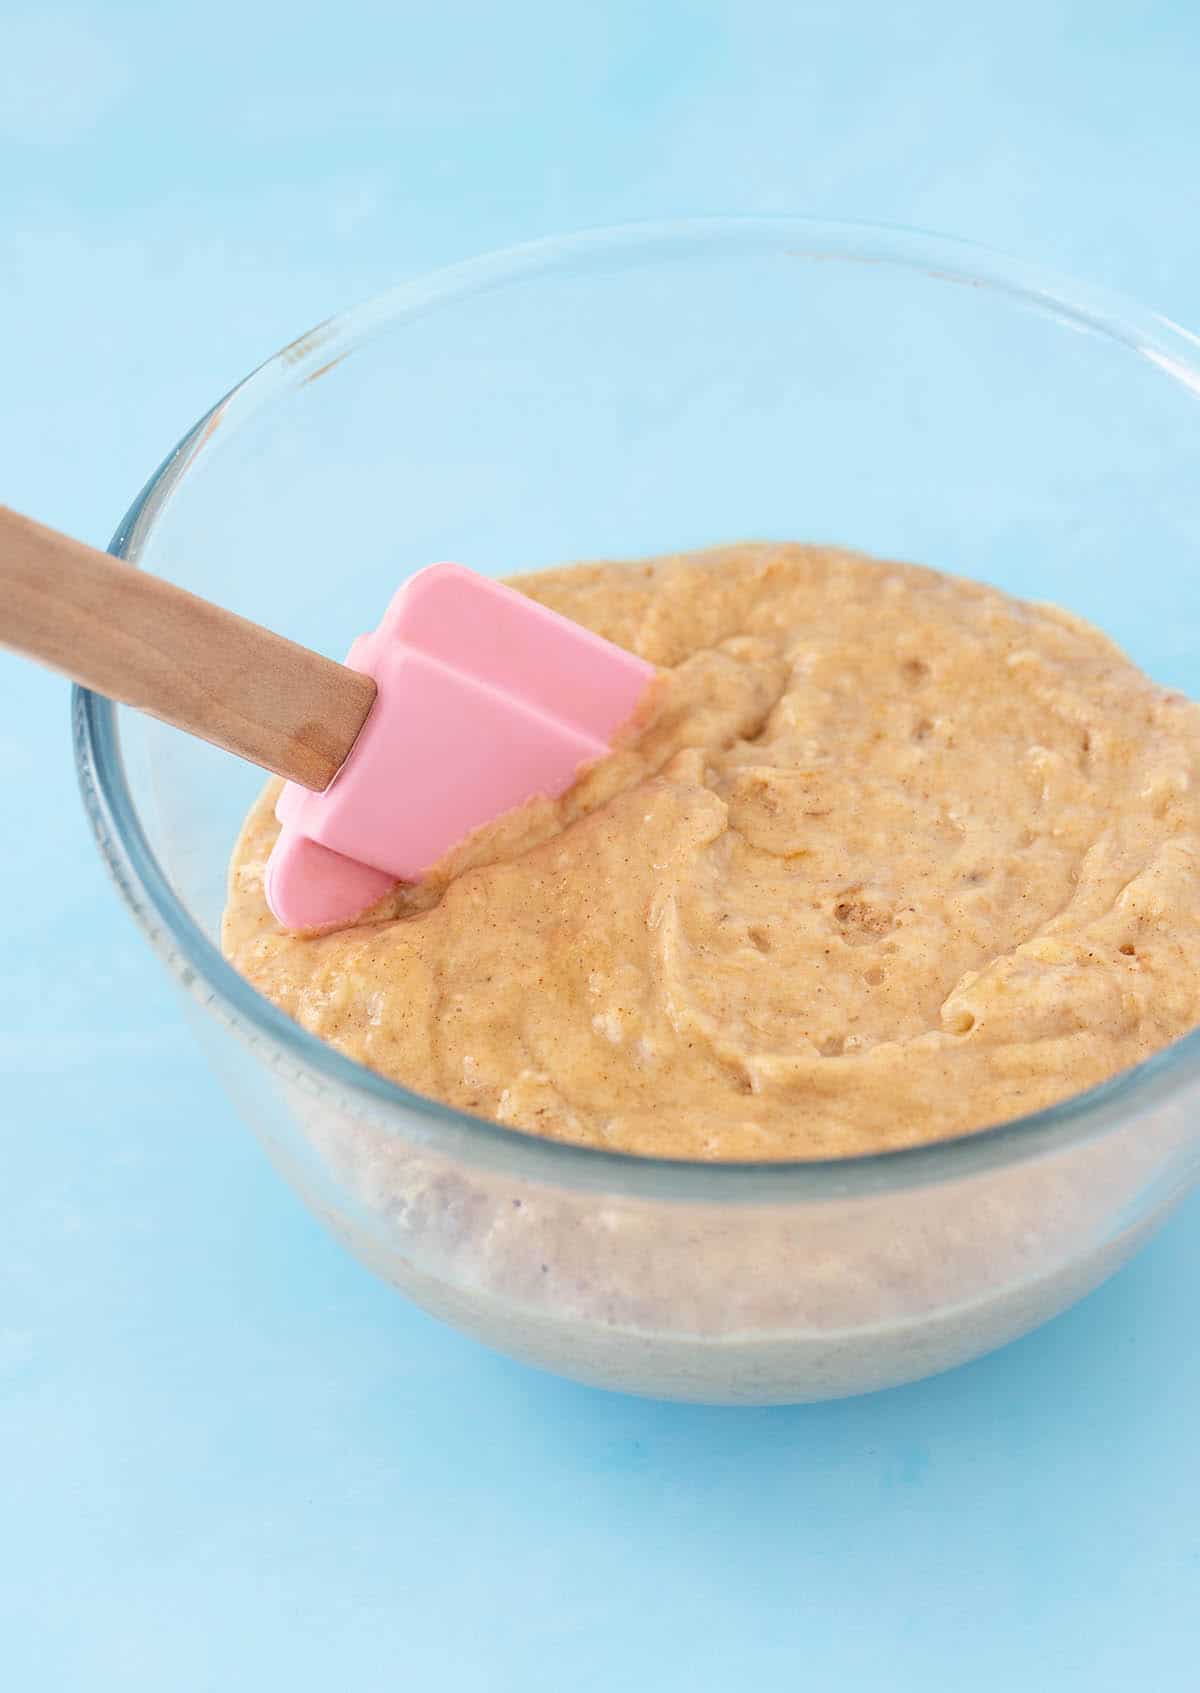 A glass mixing bowl filled with banana muffin batter